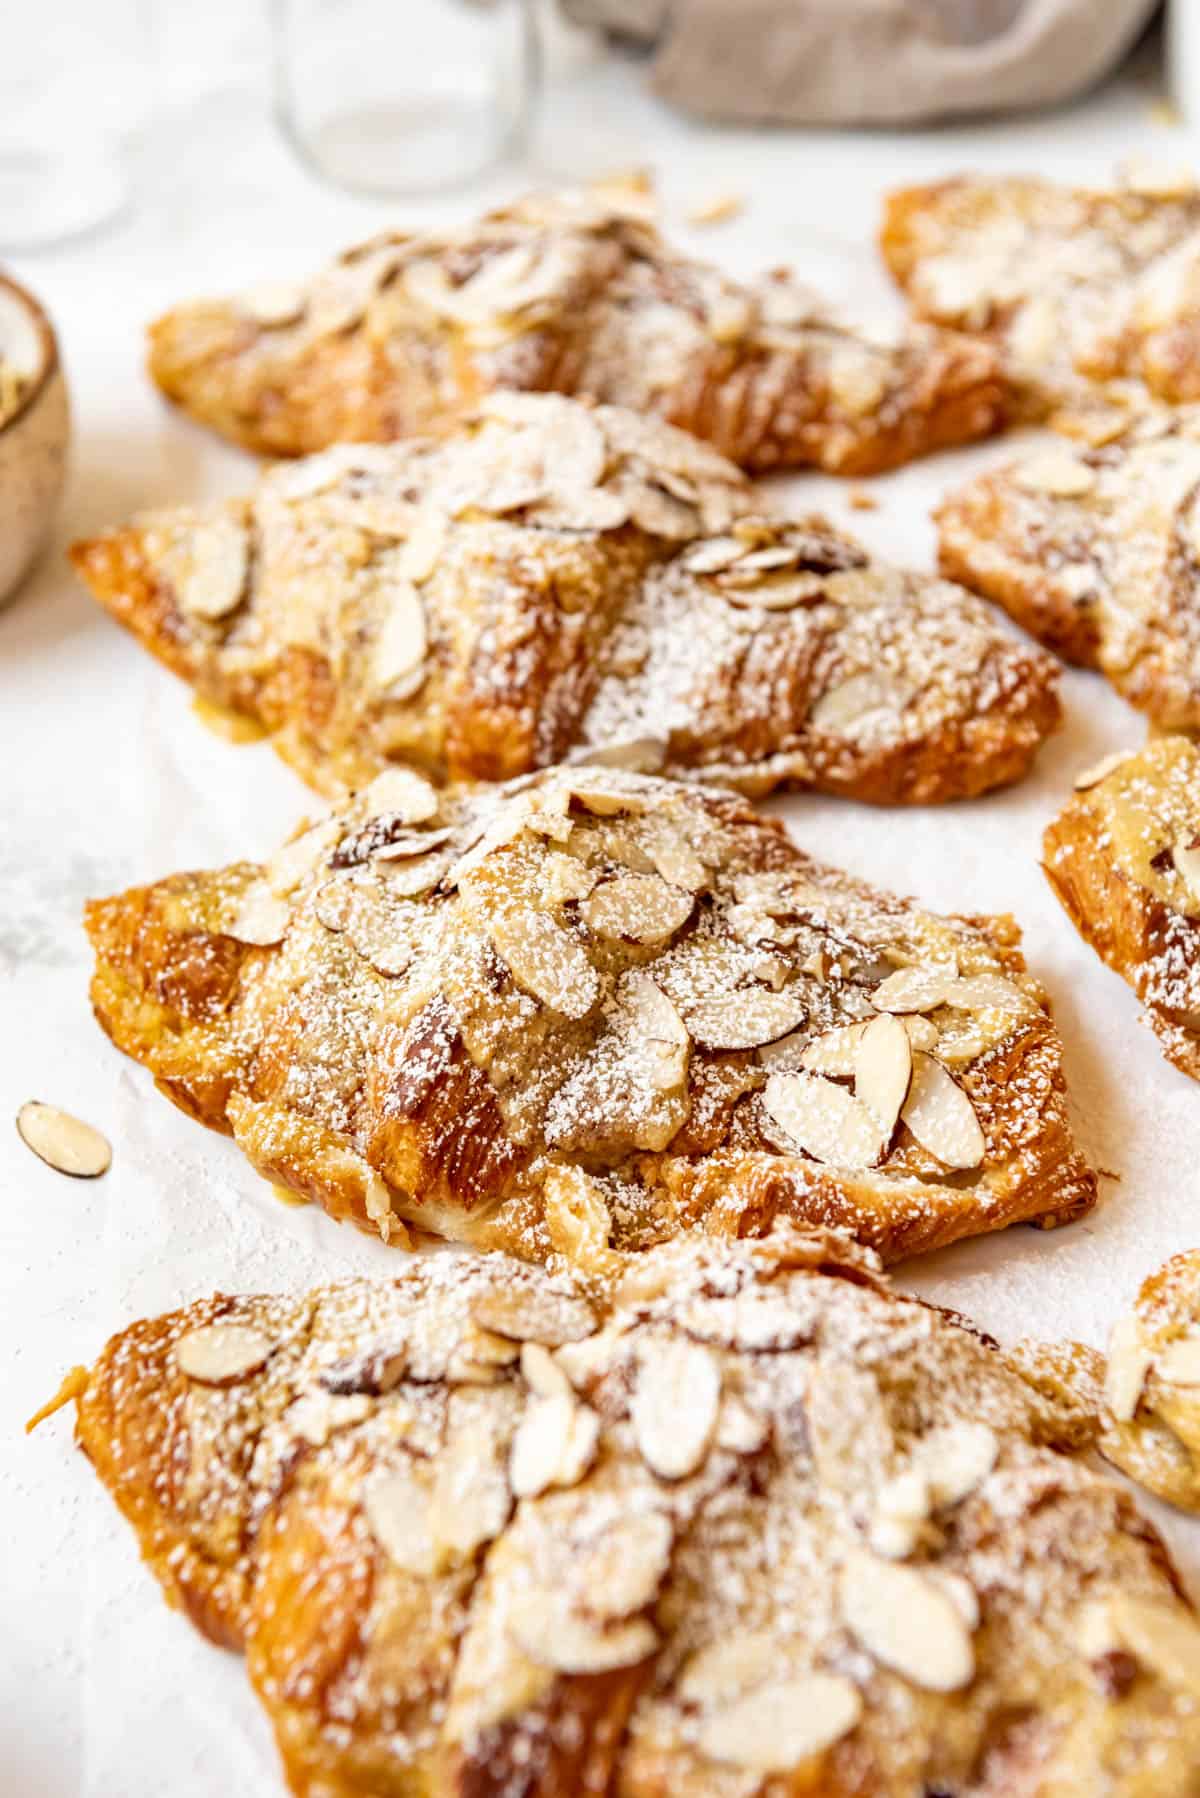 Fresh almond croissants dusted with powdered sugar.